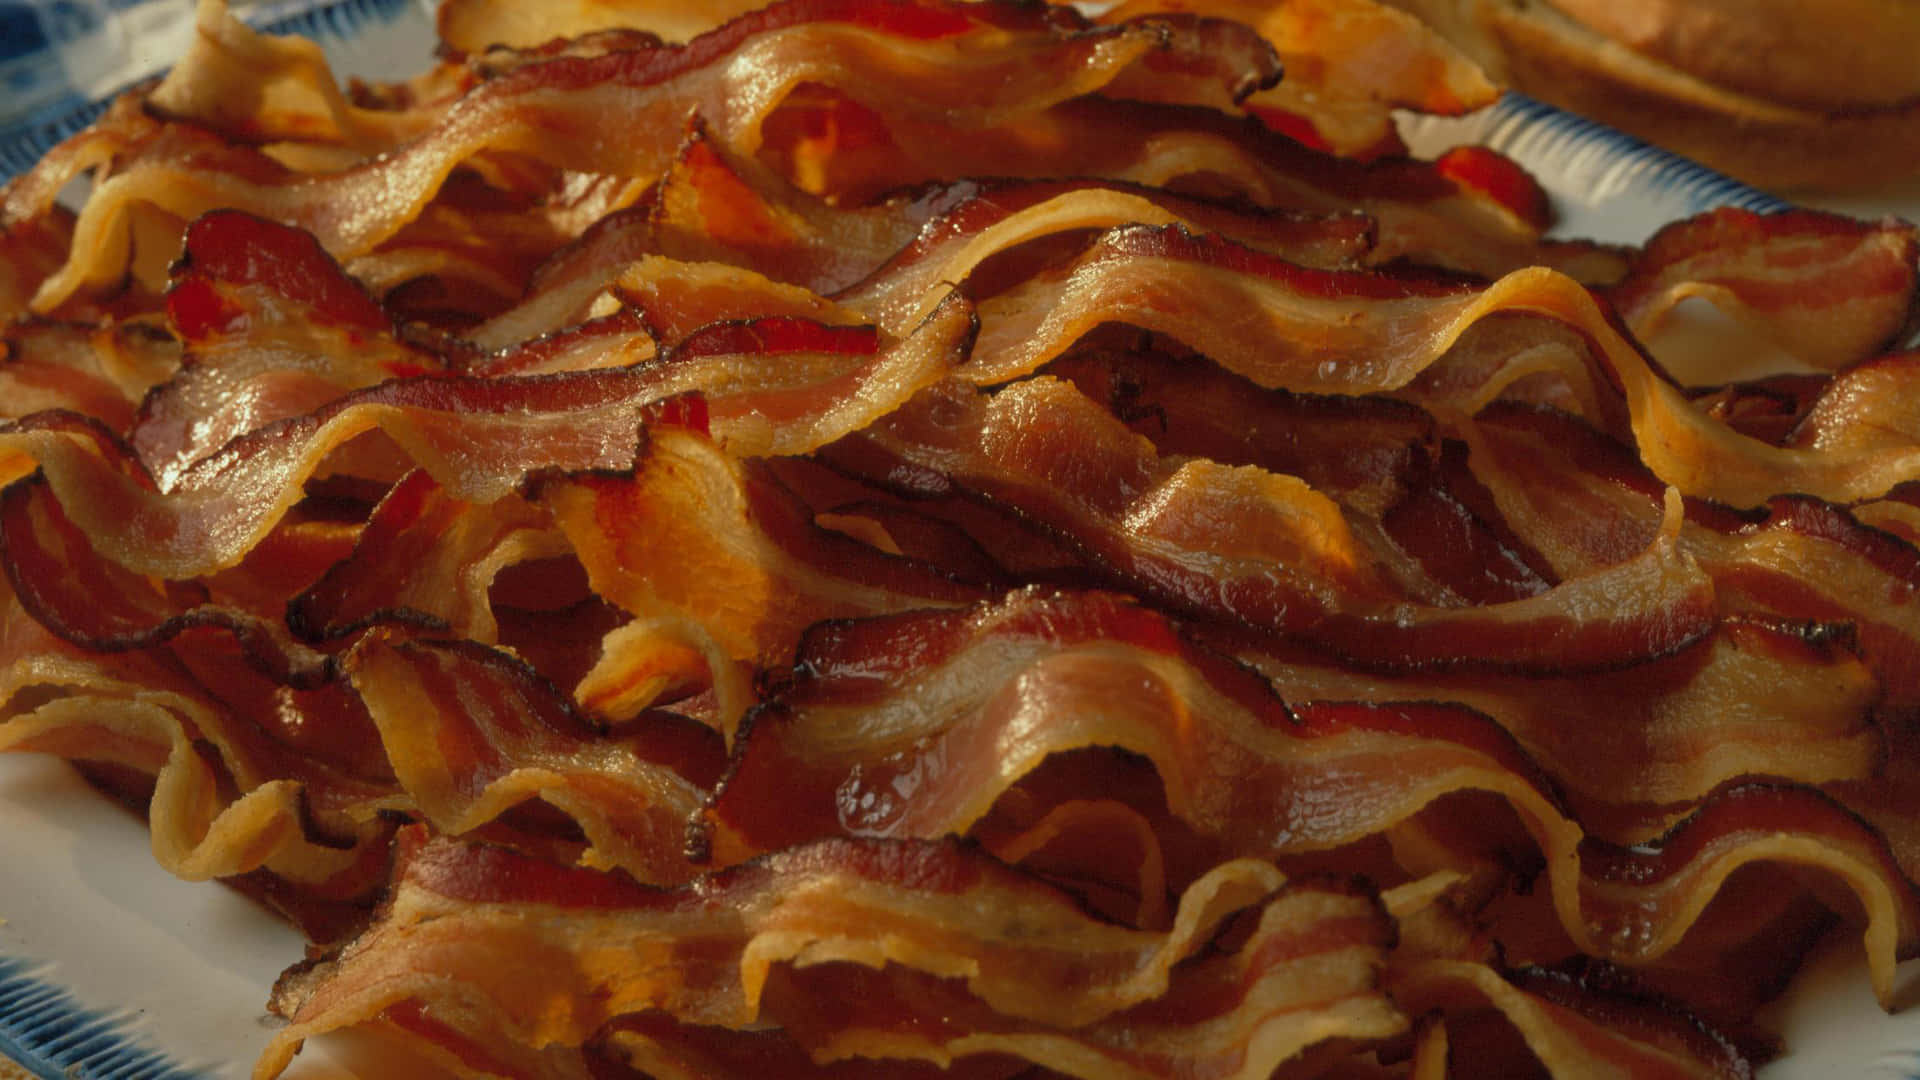 Start your day right with a delicious strip of bacon.